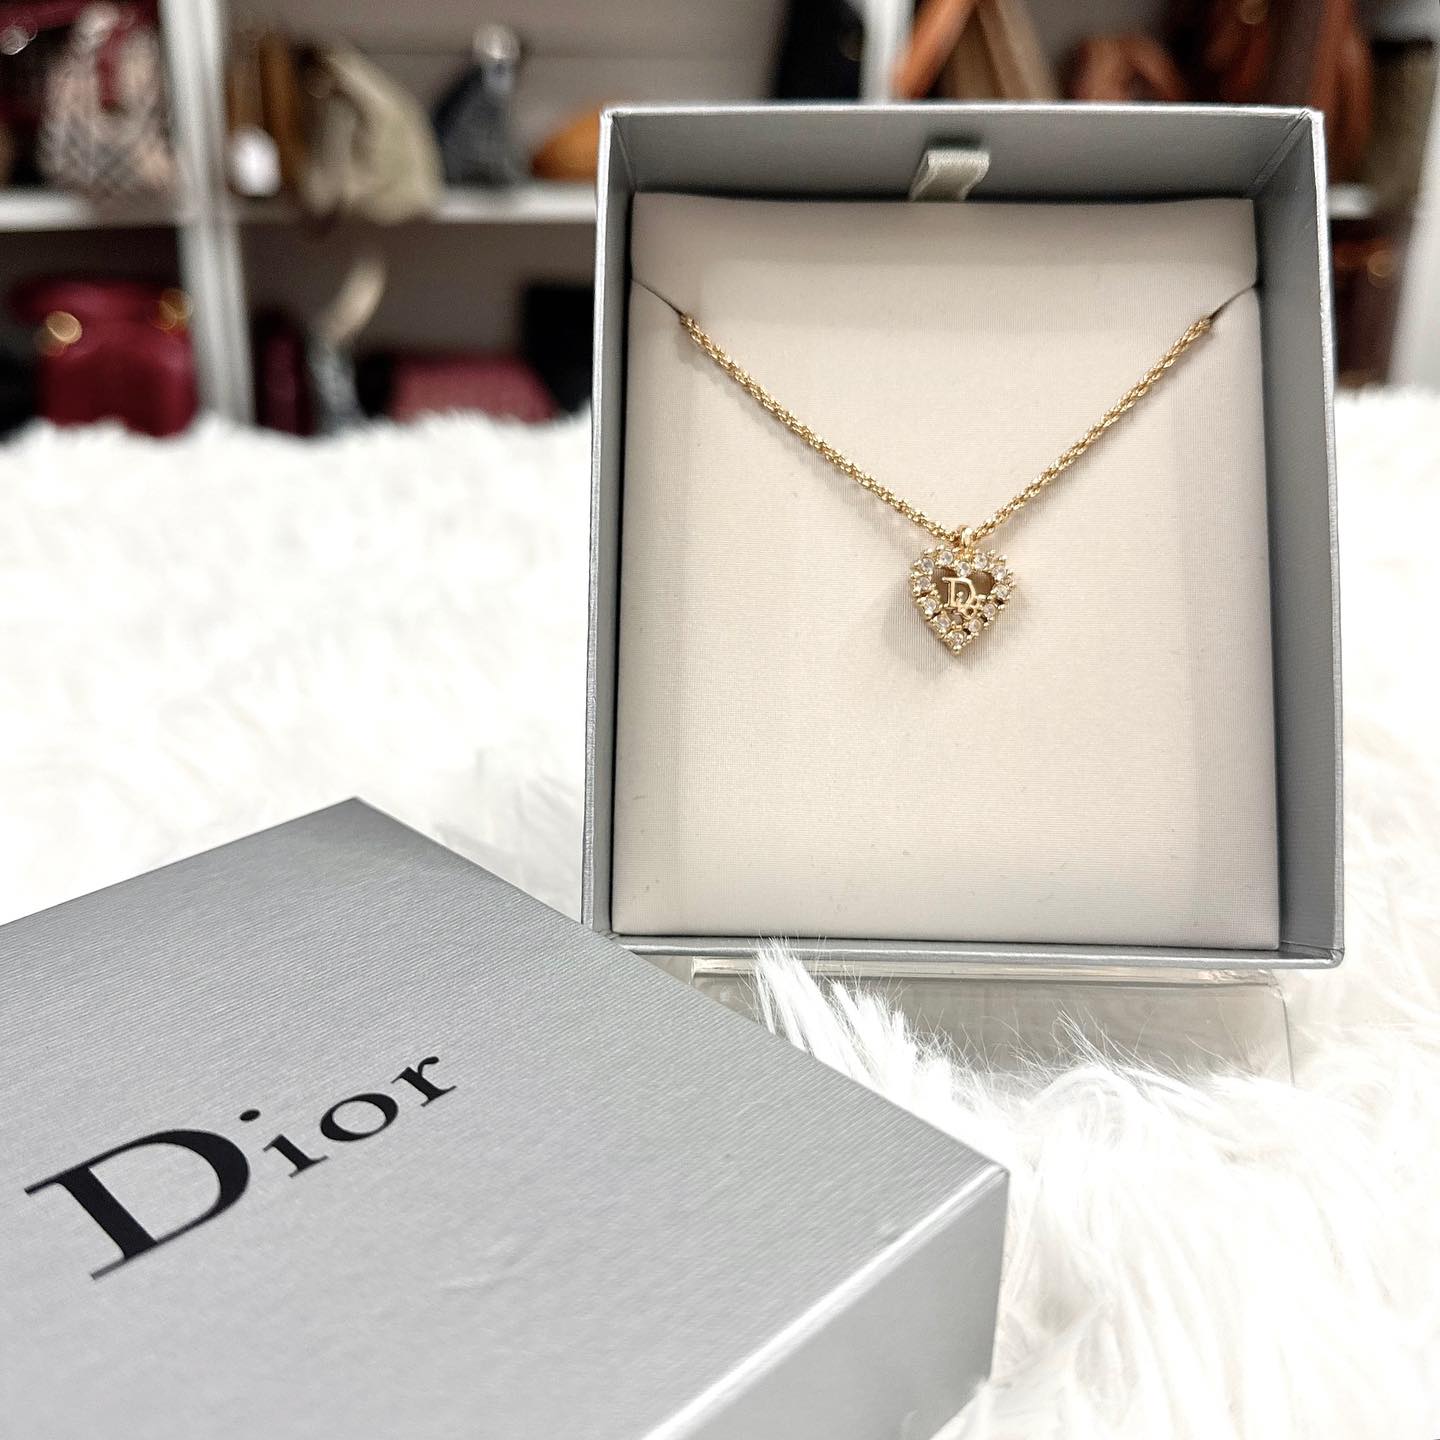 Christian Dior Necklace 心心頸鍊 連原裝盒